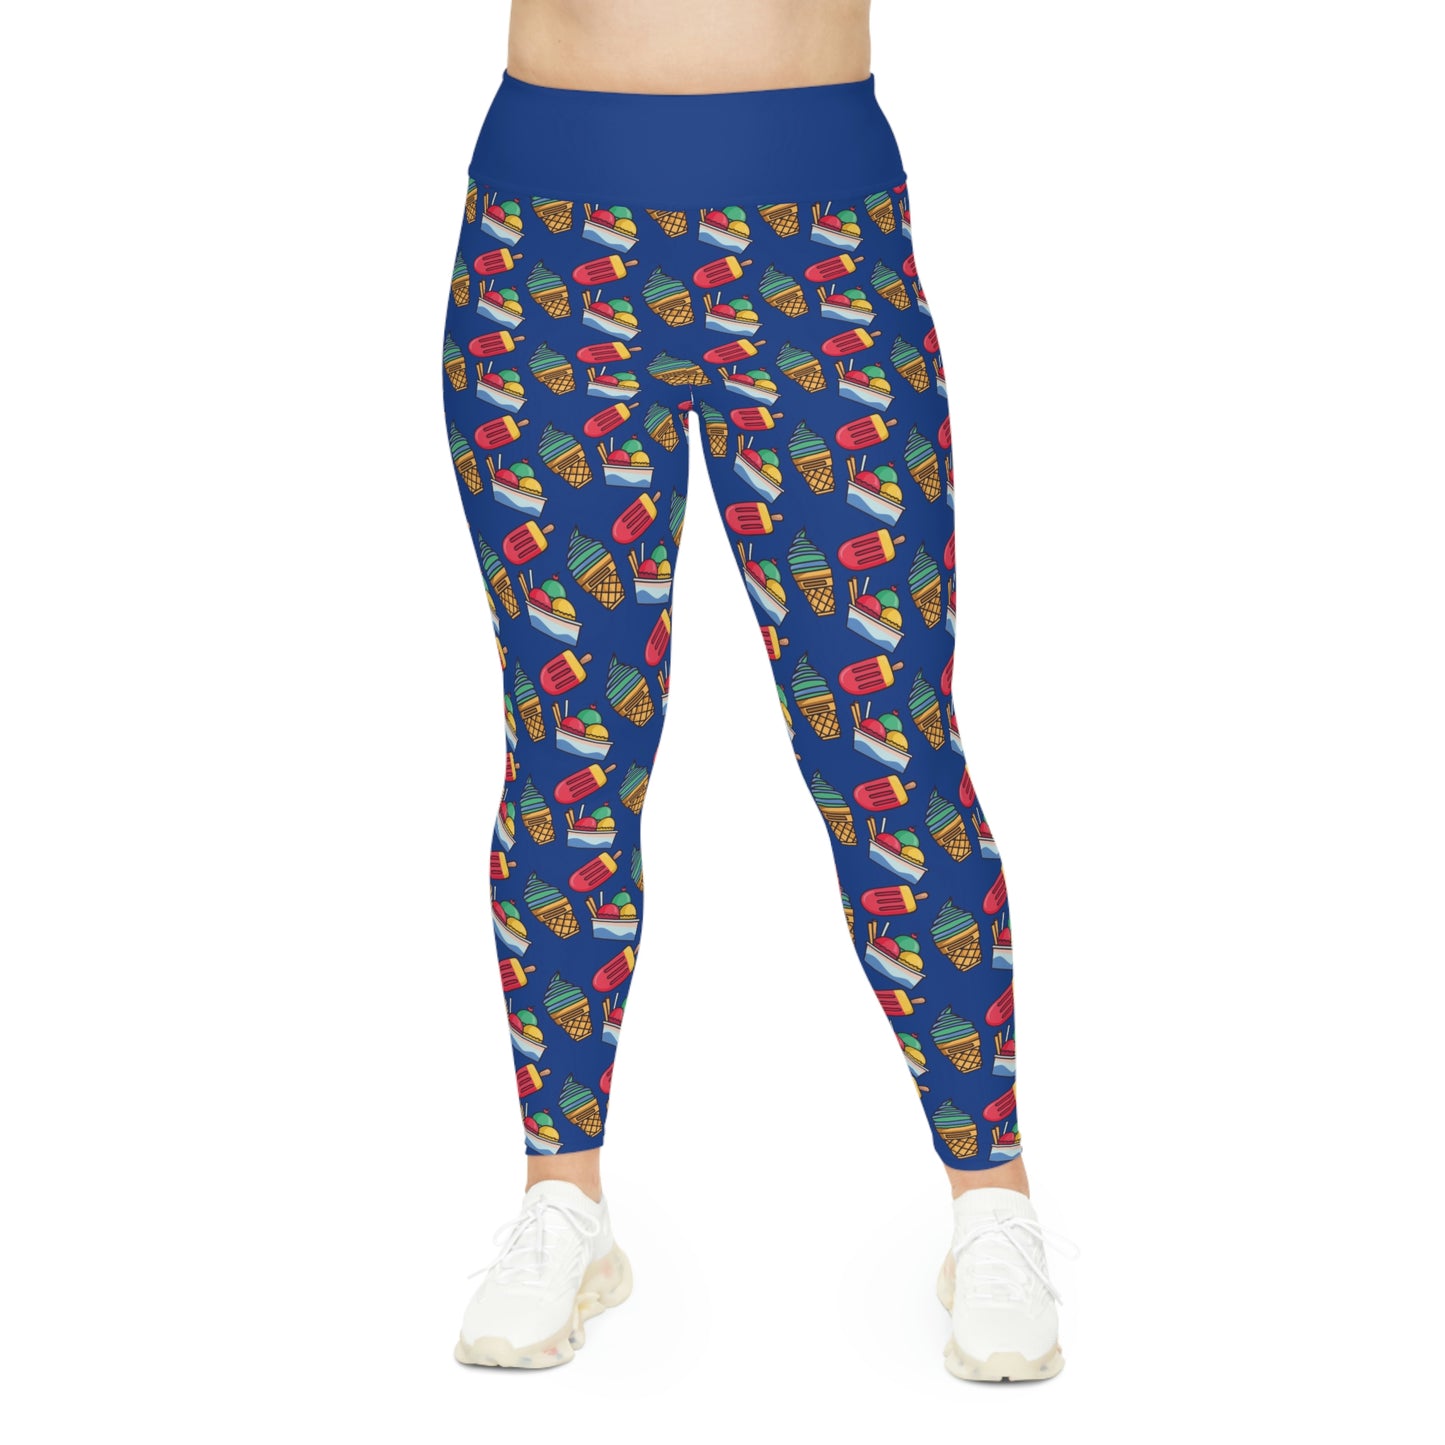 Ice Cream Scoop Cute Summer Plus Size Leggings, One of a Kind Gift - Workout Activewear tights for Mothers Day, Girlfriend